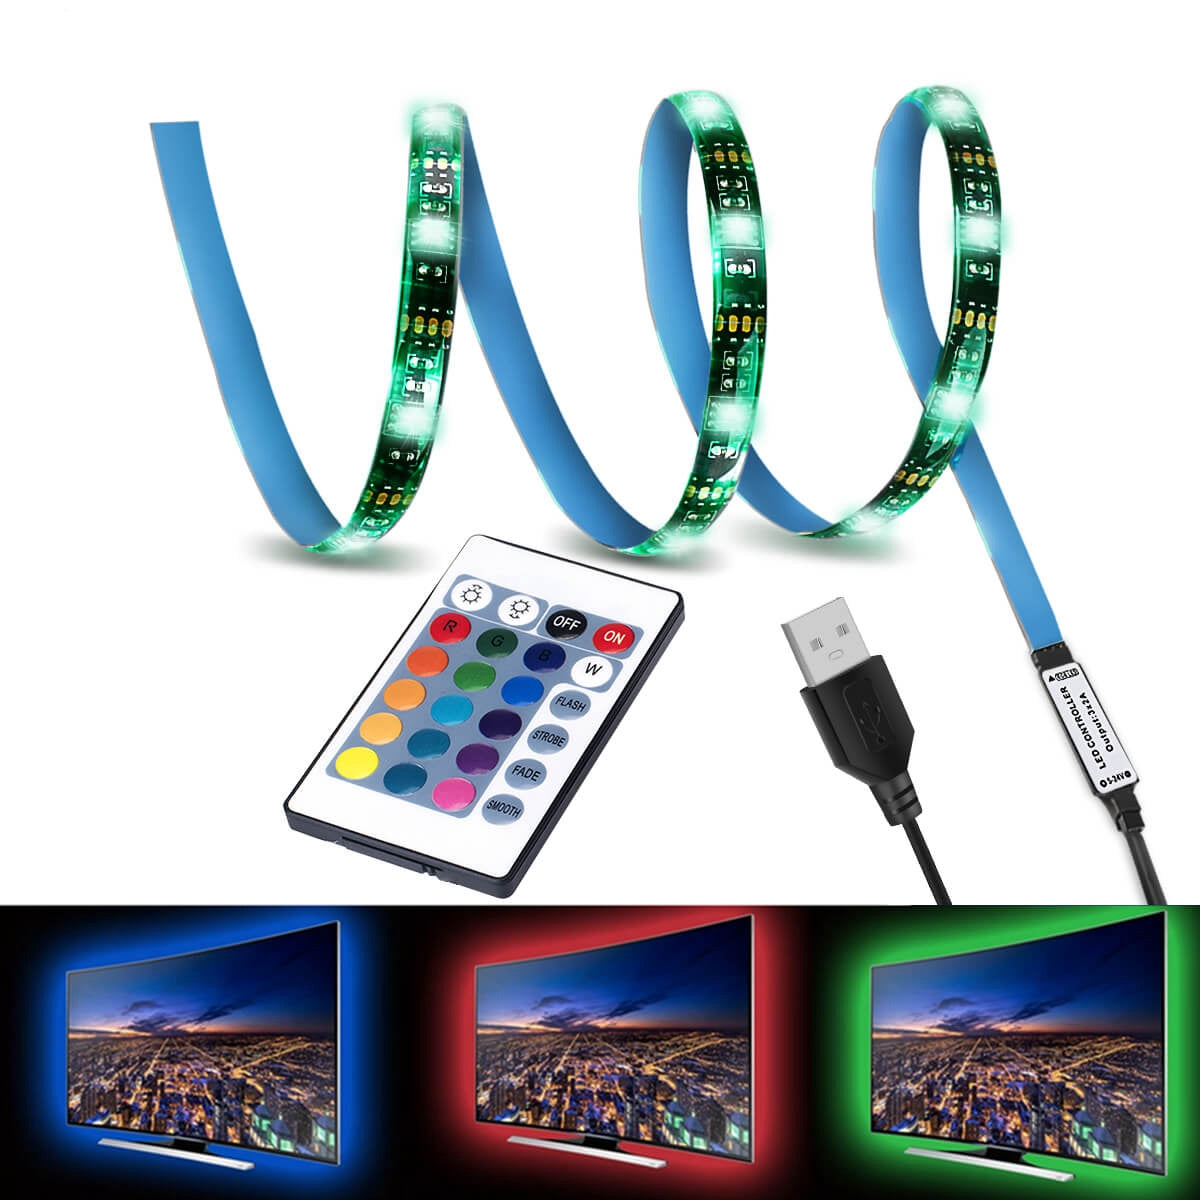 LED TV Backlight,SMY USB LED Strip Light,RGB Multi-Colour LED Light Strip Kit Waterproof IP65, 30led with Wireless Remote Controller for TV/PC